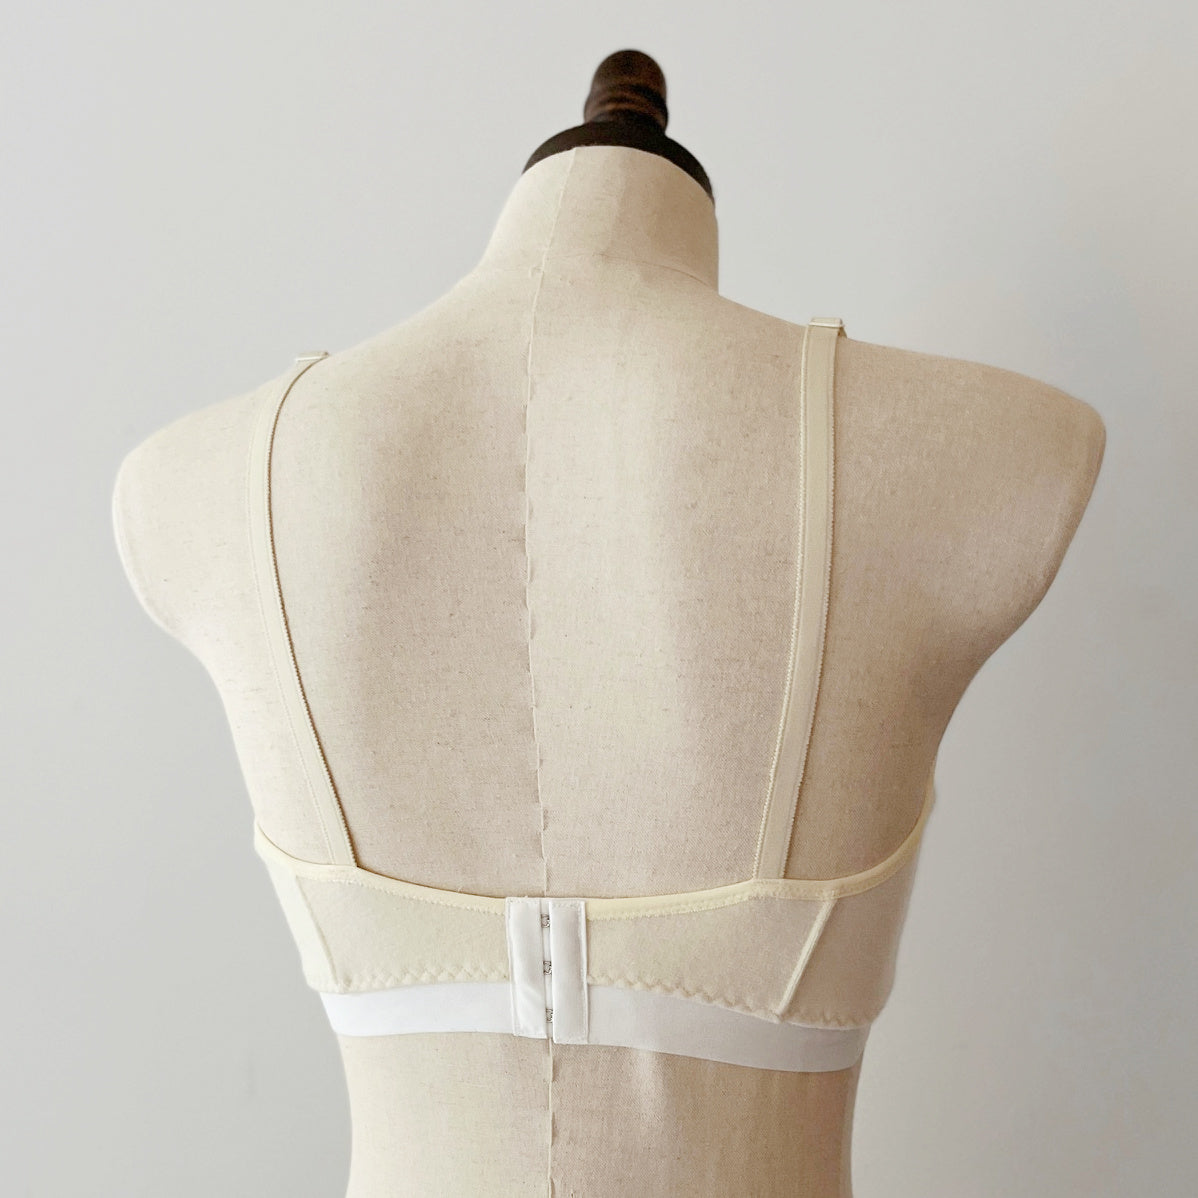 Natural or Off-White Merino wool bra all sizes | Ready-To-Ship